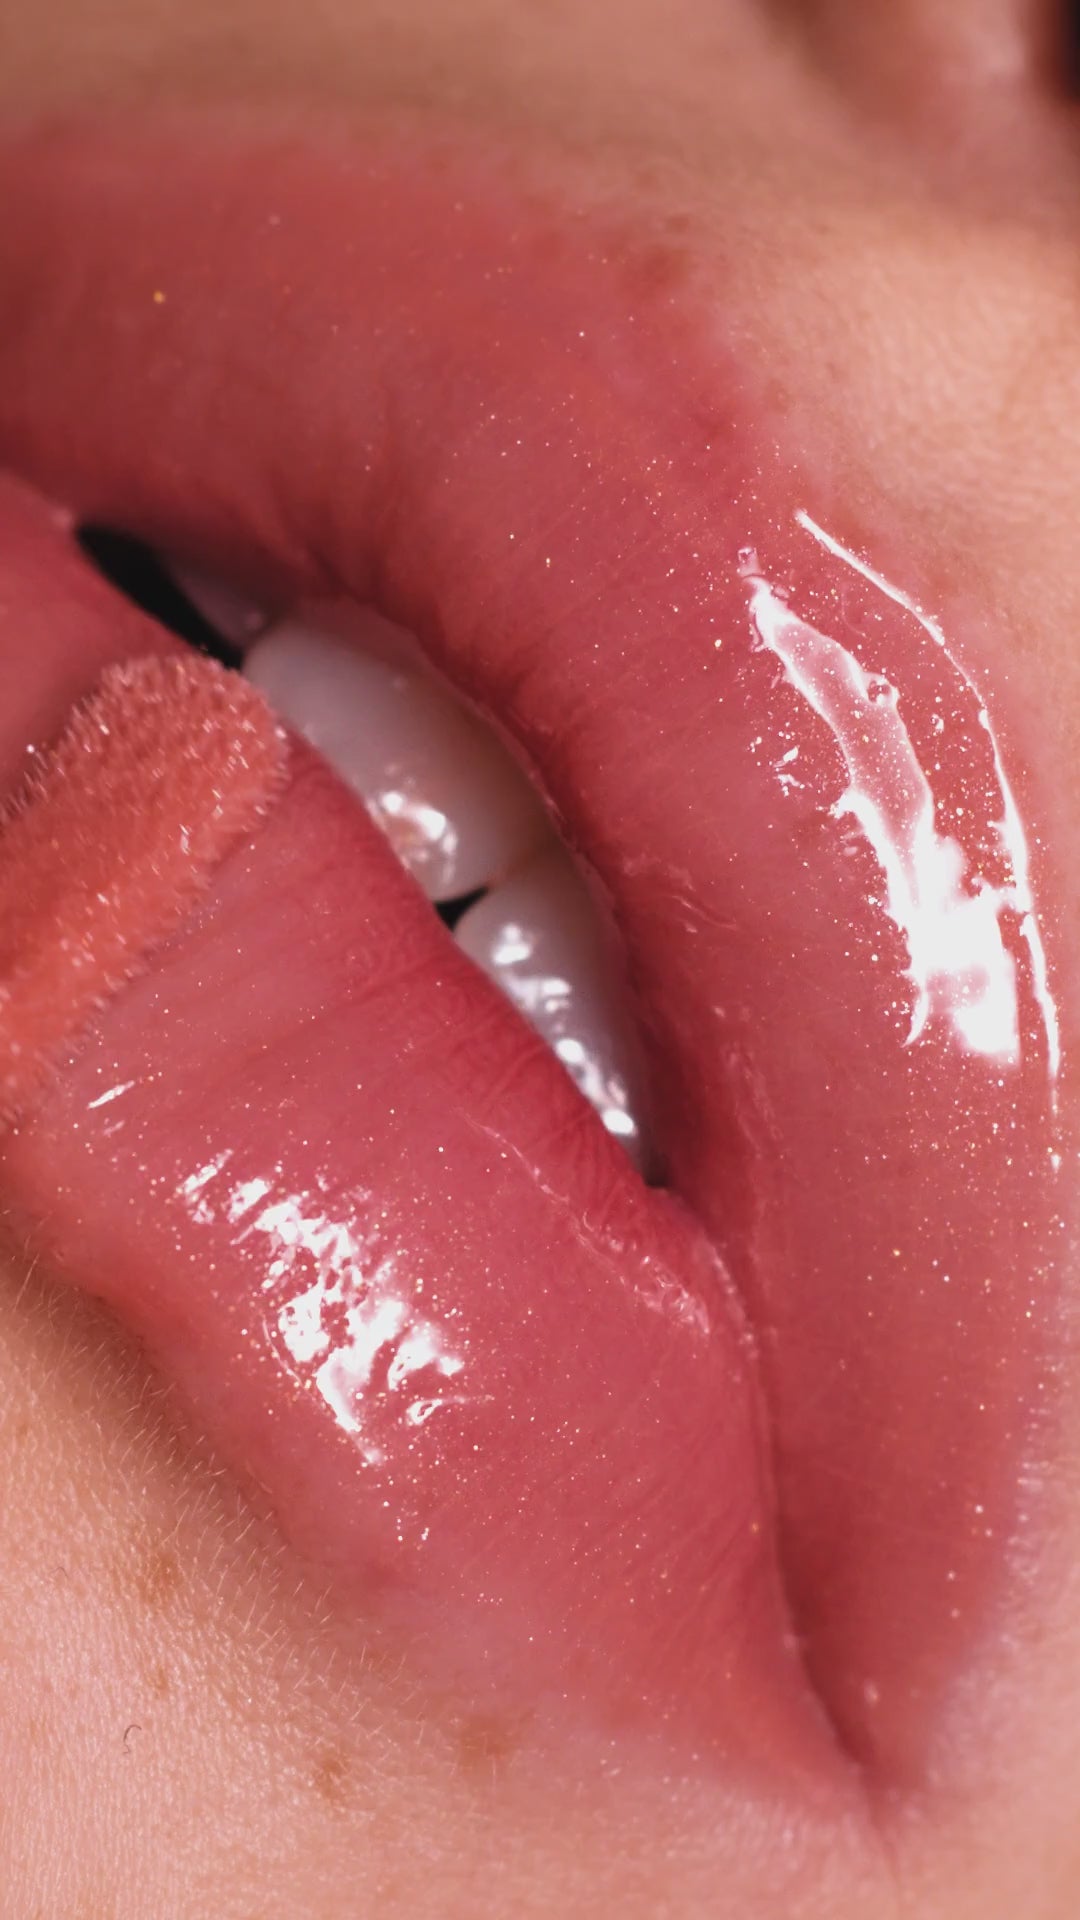 Pout Glaze High-Shine-Hyaluronic Lip Gloss (Gailey) Main Image featured